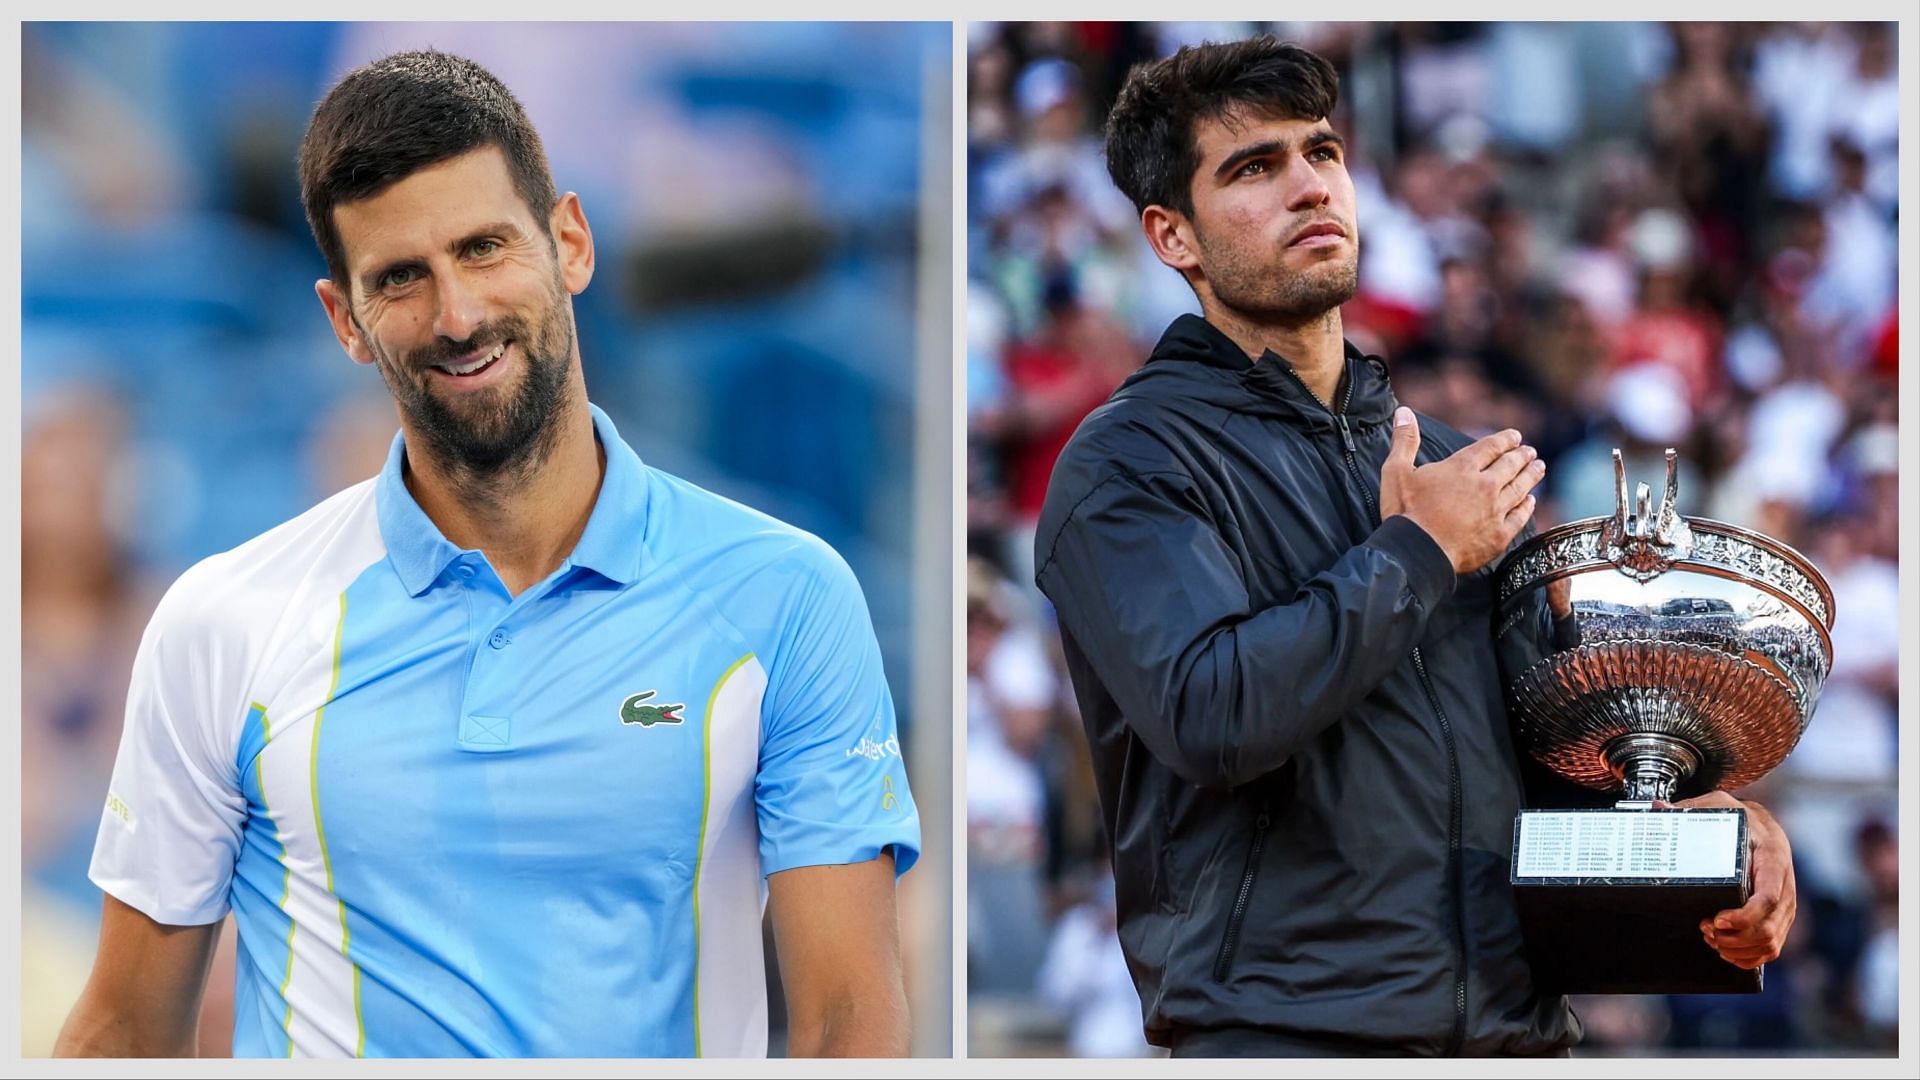 Novak Djokovic sends heartfelt wishes to Carlos Alcaraz; hails his historic all-surface achievement as Spaniard dethrones him at French Open